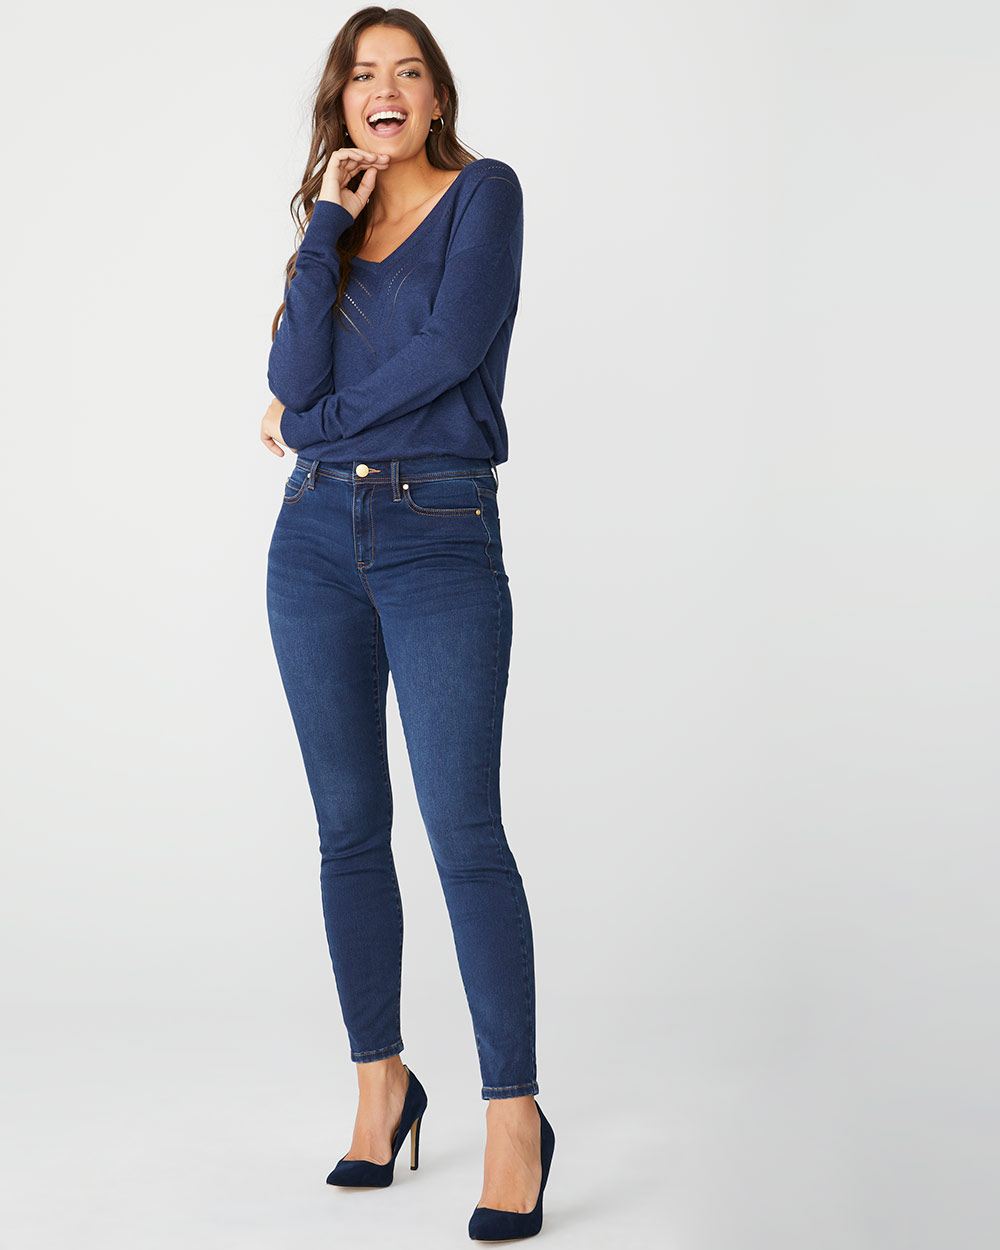 Natalie Mid-rise ankle jegging in rinse wash denim | RW&CO.